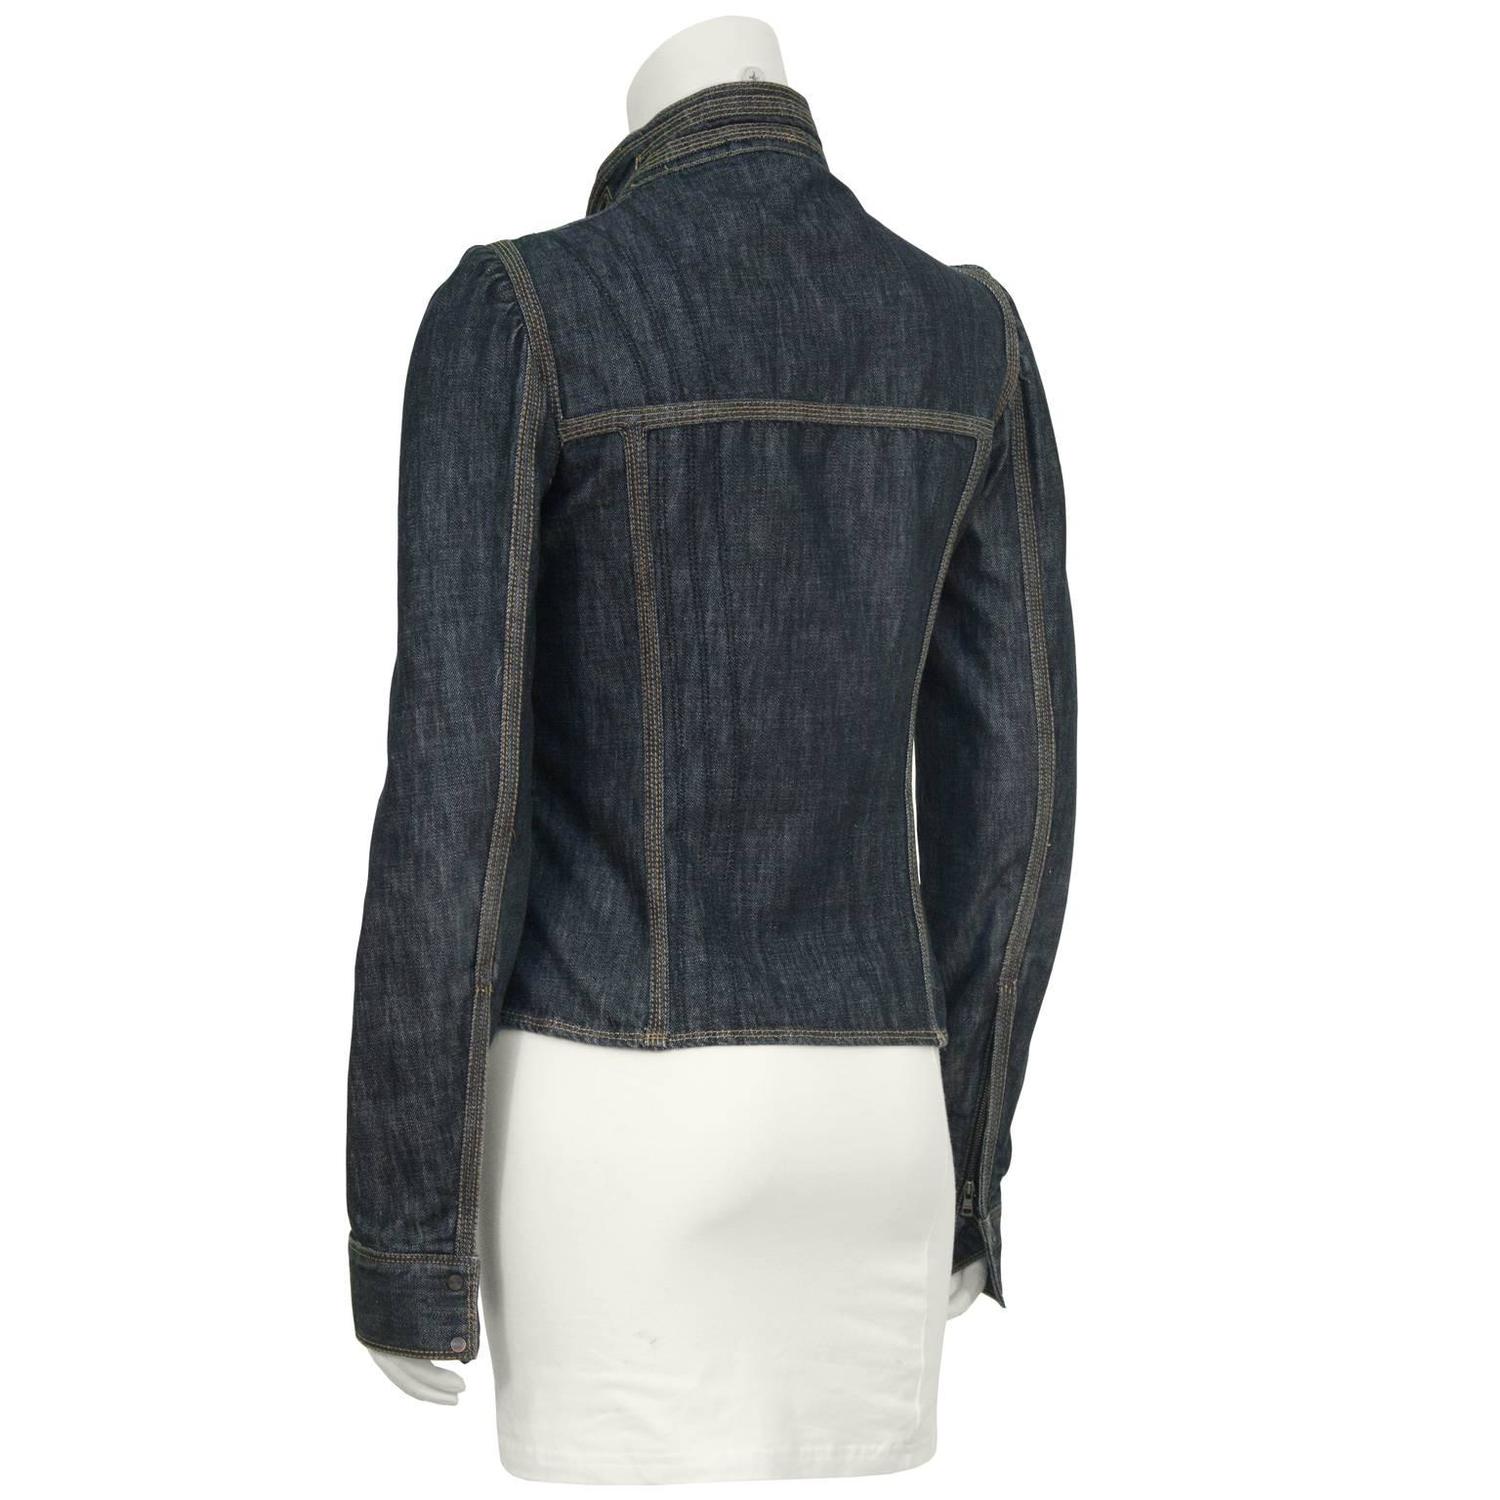 2002 Tom Ford Era Gucci Fitted Jean Jacket For Sale at 1stdibs